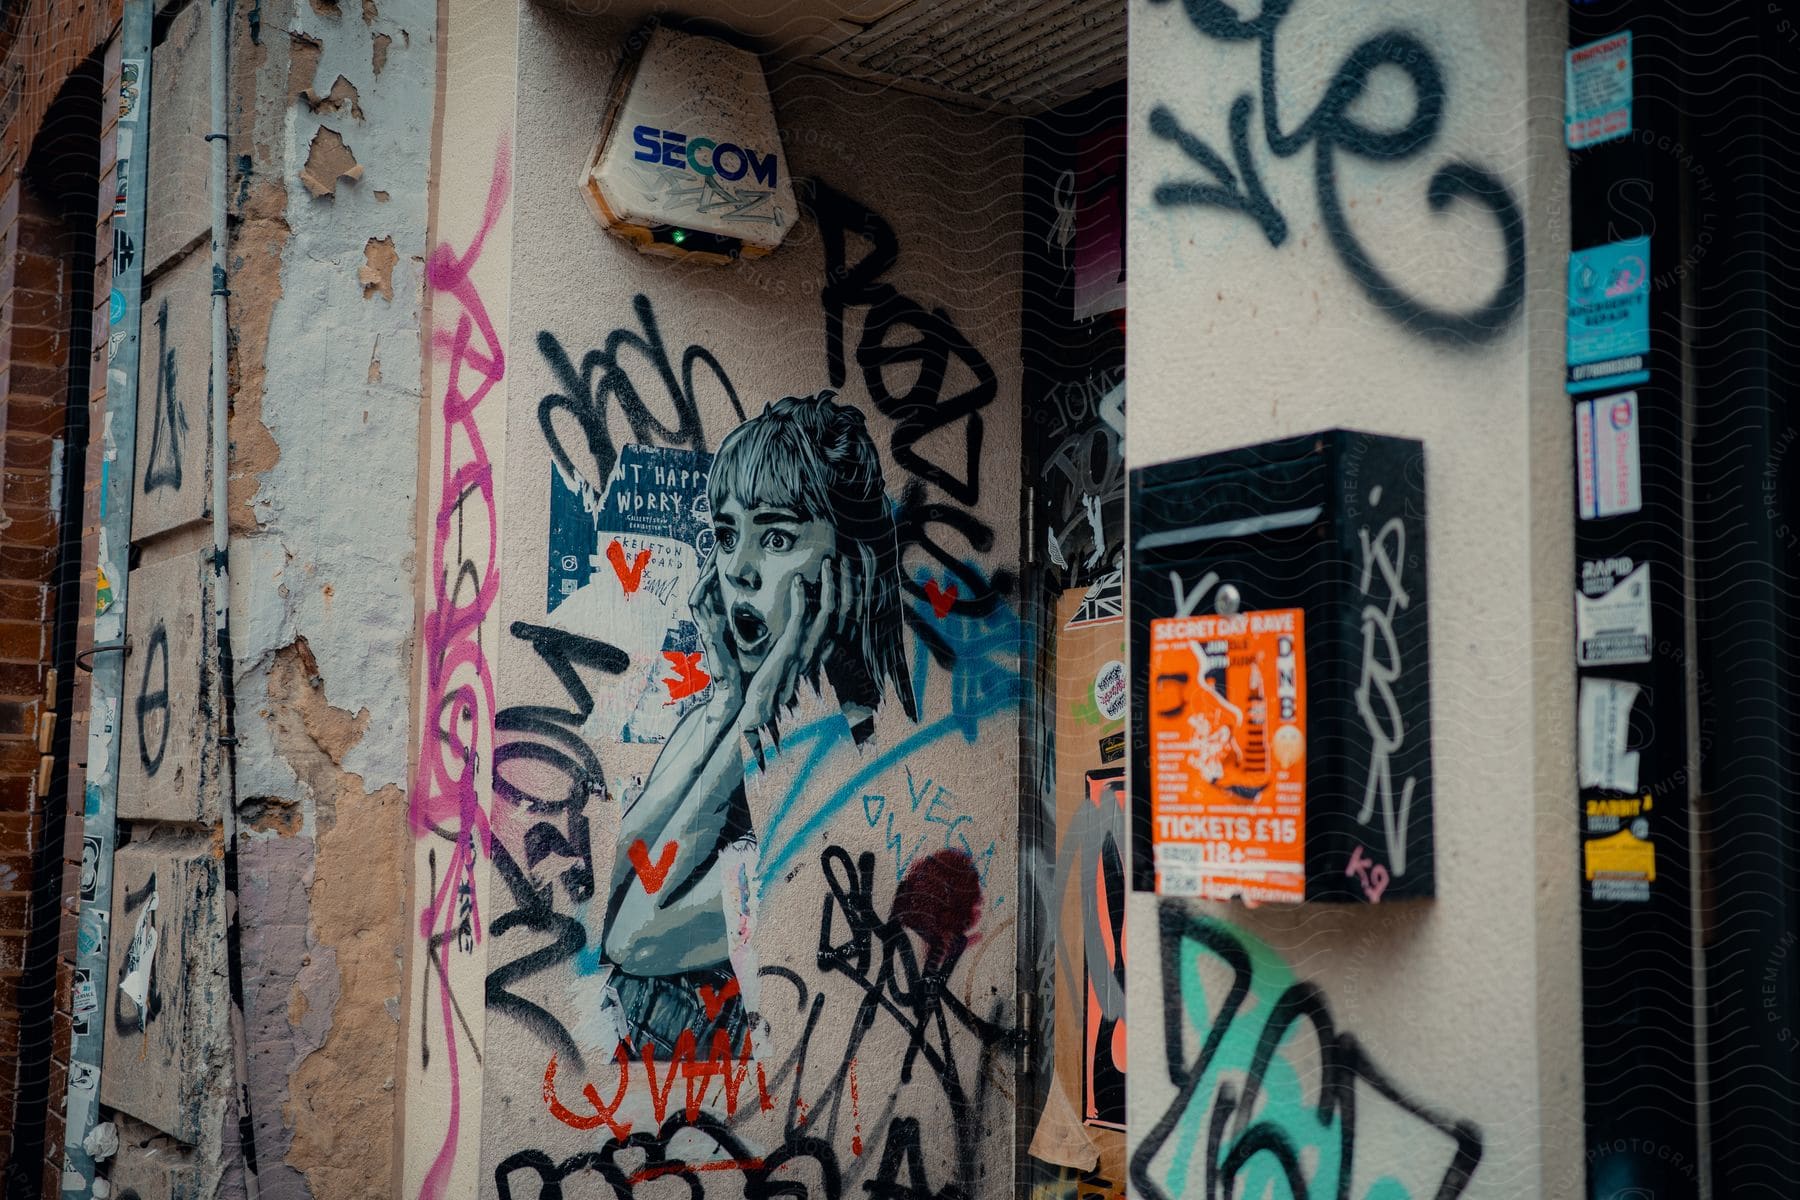 Urban street art of a surprised woman with graffiti and flyers on the surrounding wall.